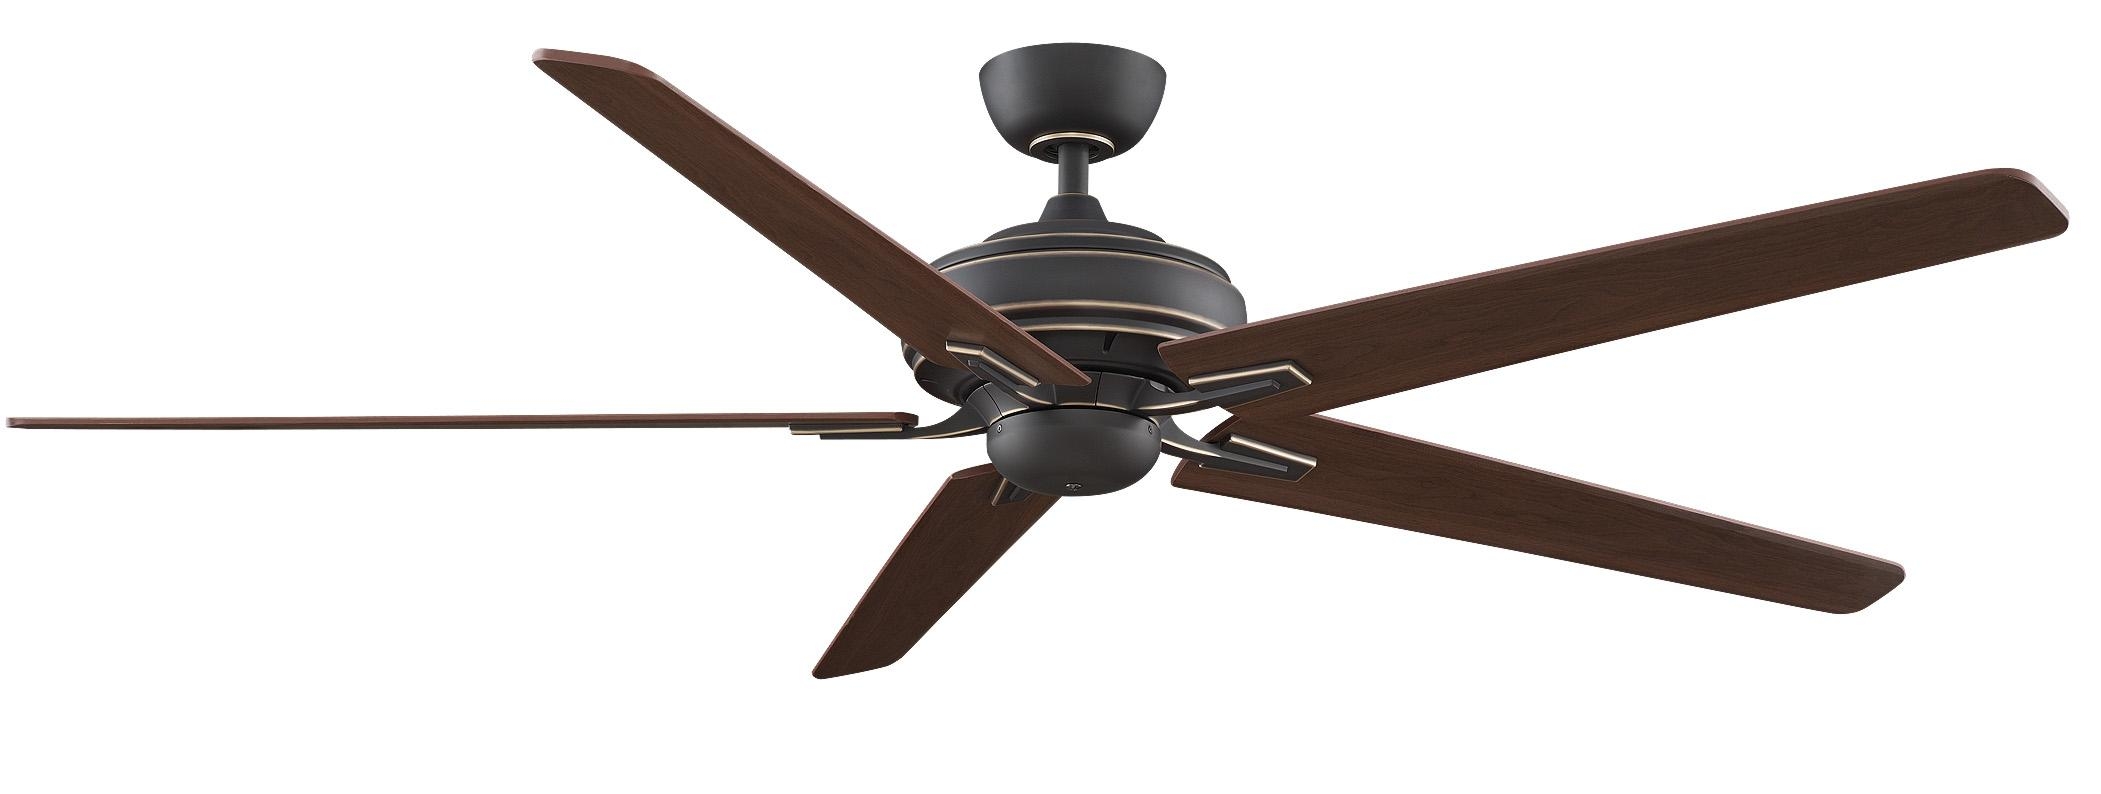 60 Ceiling Fans Without Lights